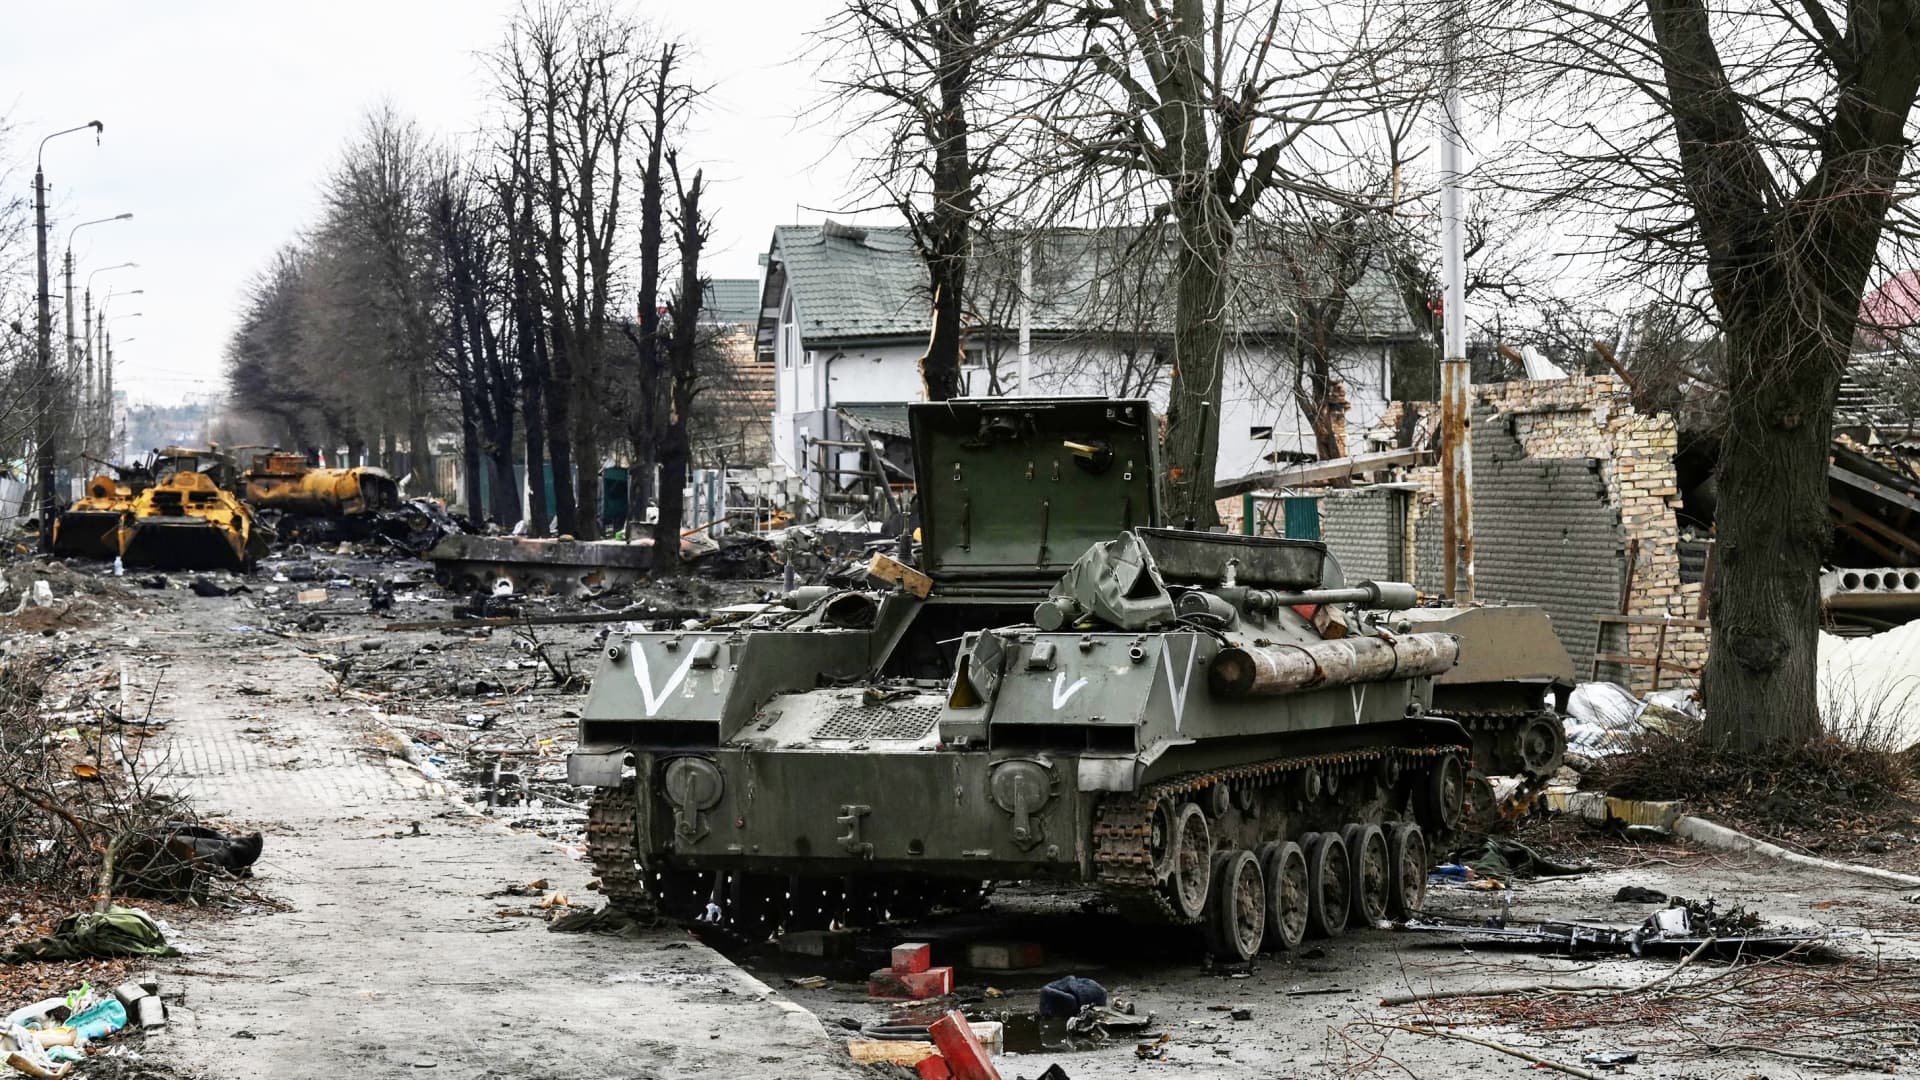 This general view shows destroyed Russian armored vehicles in the city of Bucha, west of Kyiv, on March 4, 2022.